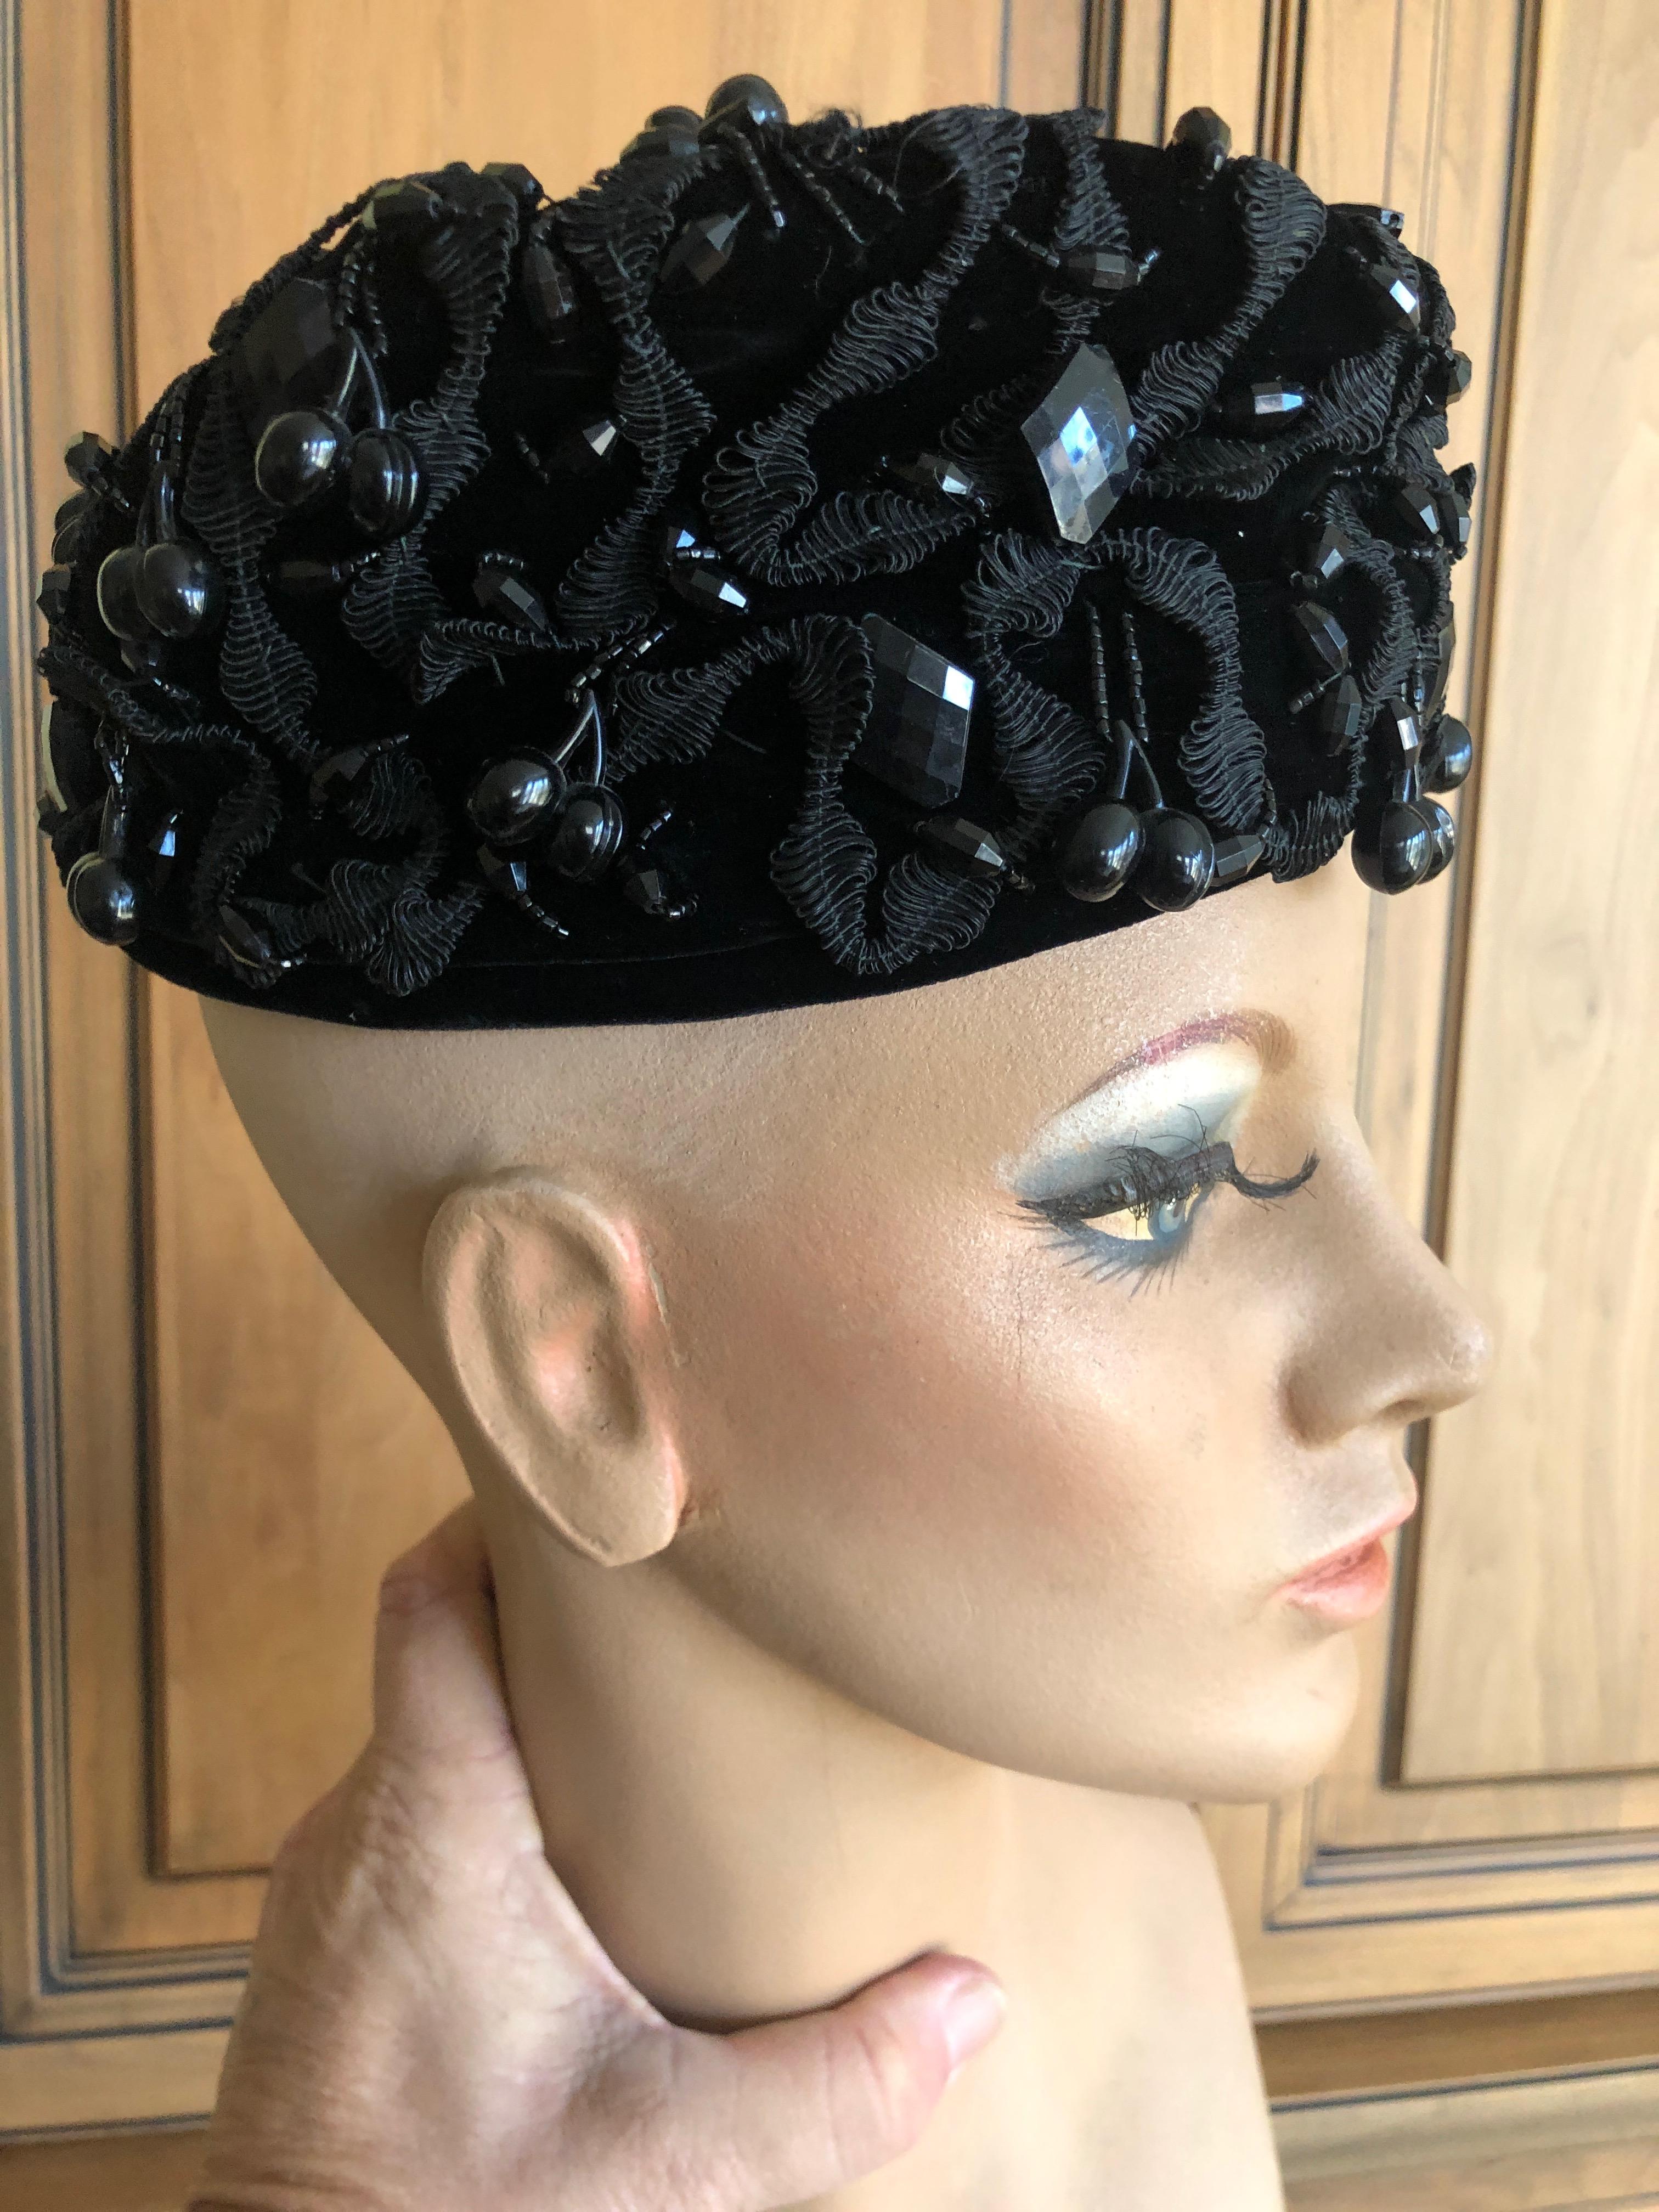 Christian Dior Chapeaux Embellished Vintage 1950 Black Pillbox Hat with Jet Cherries
22.5 inch circumfrence.
In excellent condition